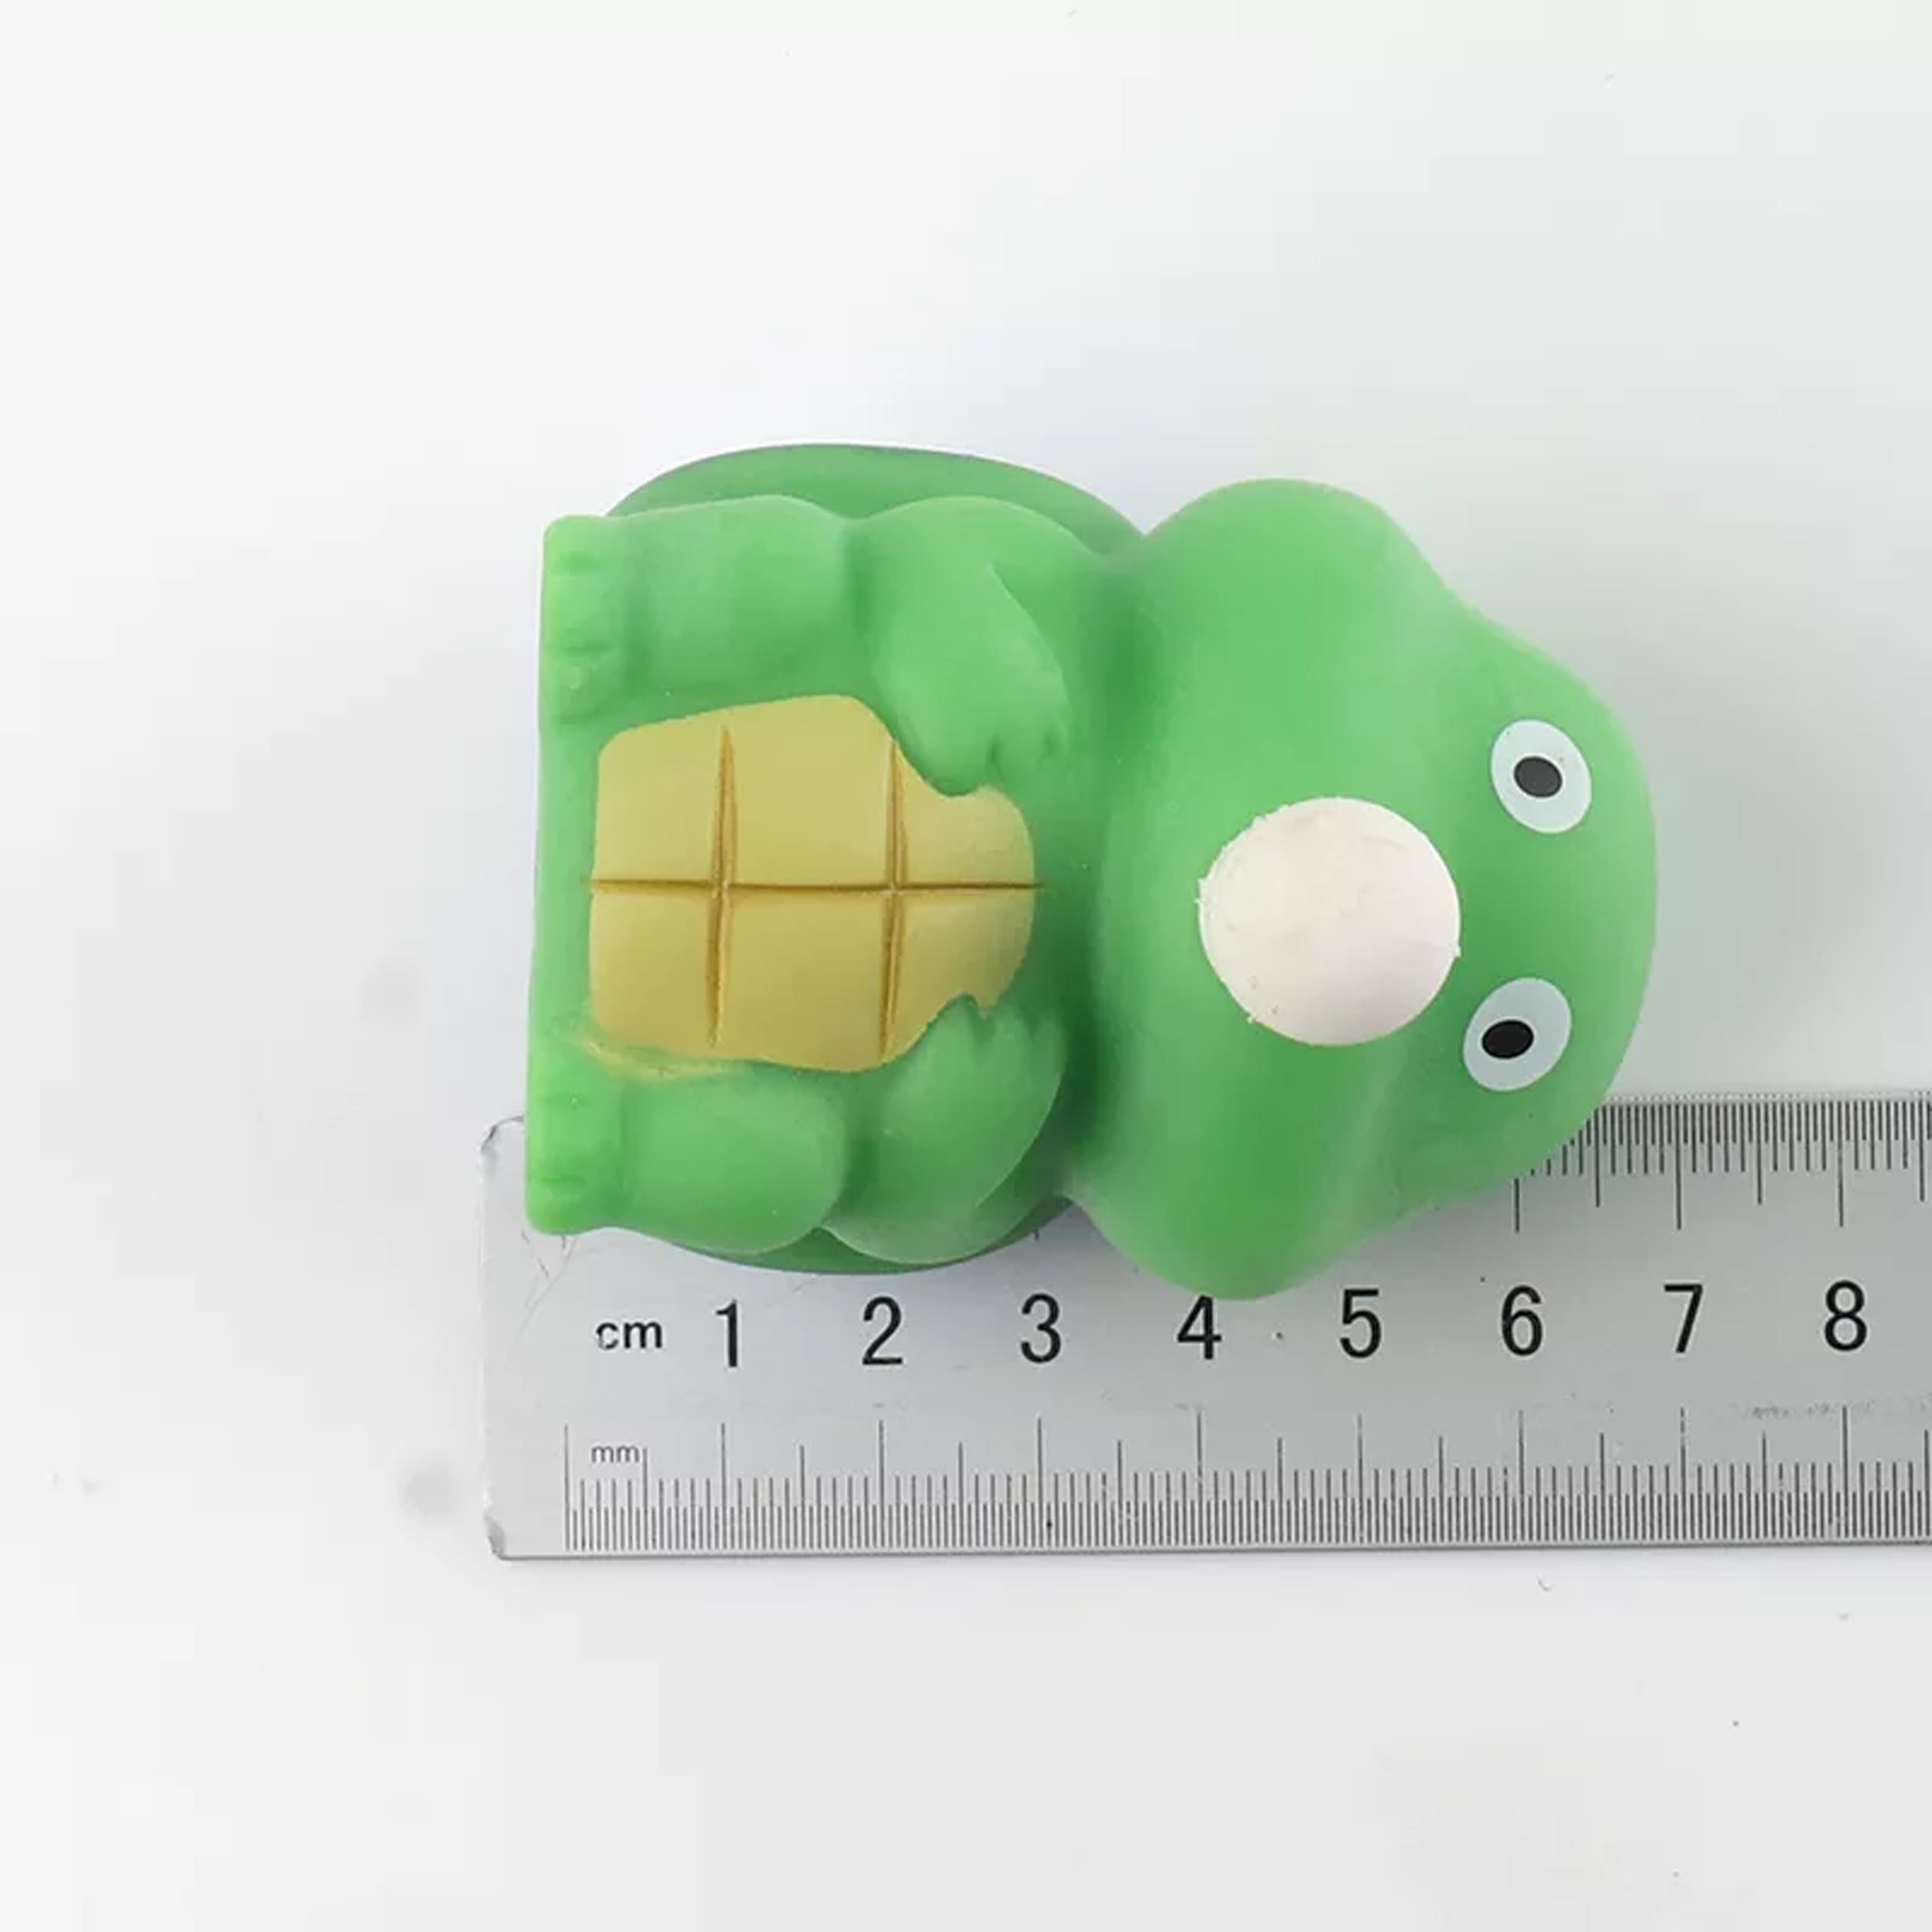 Adorable Tortoise Shaped Squeeze Toy for Kids